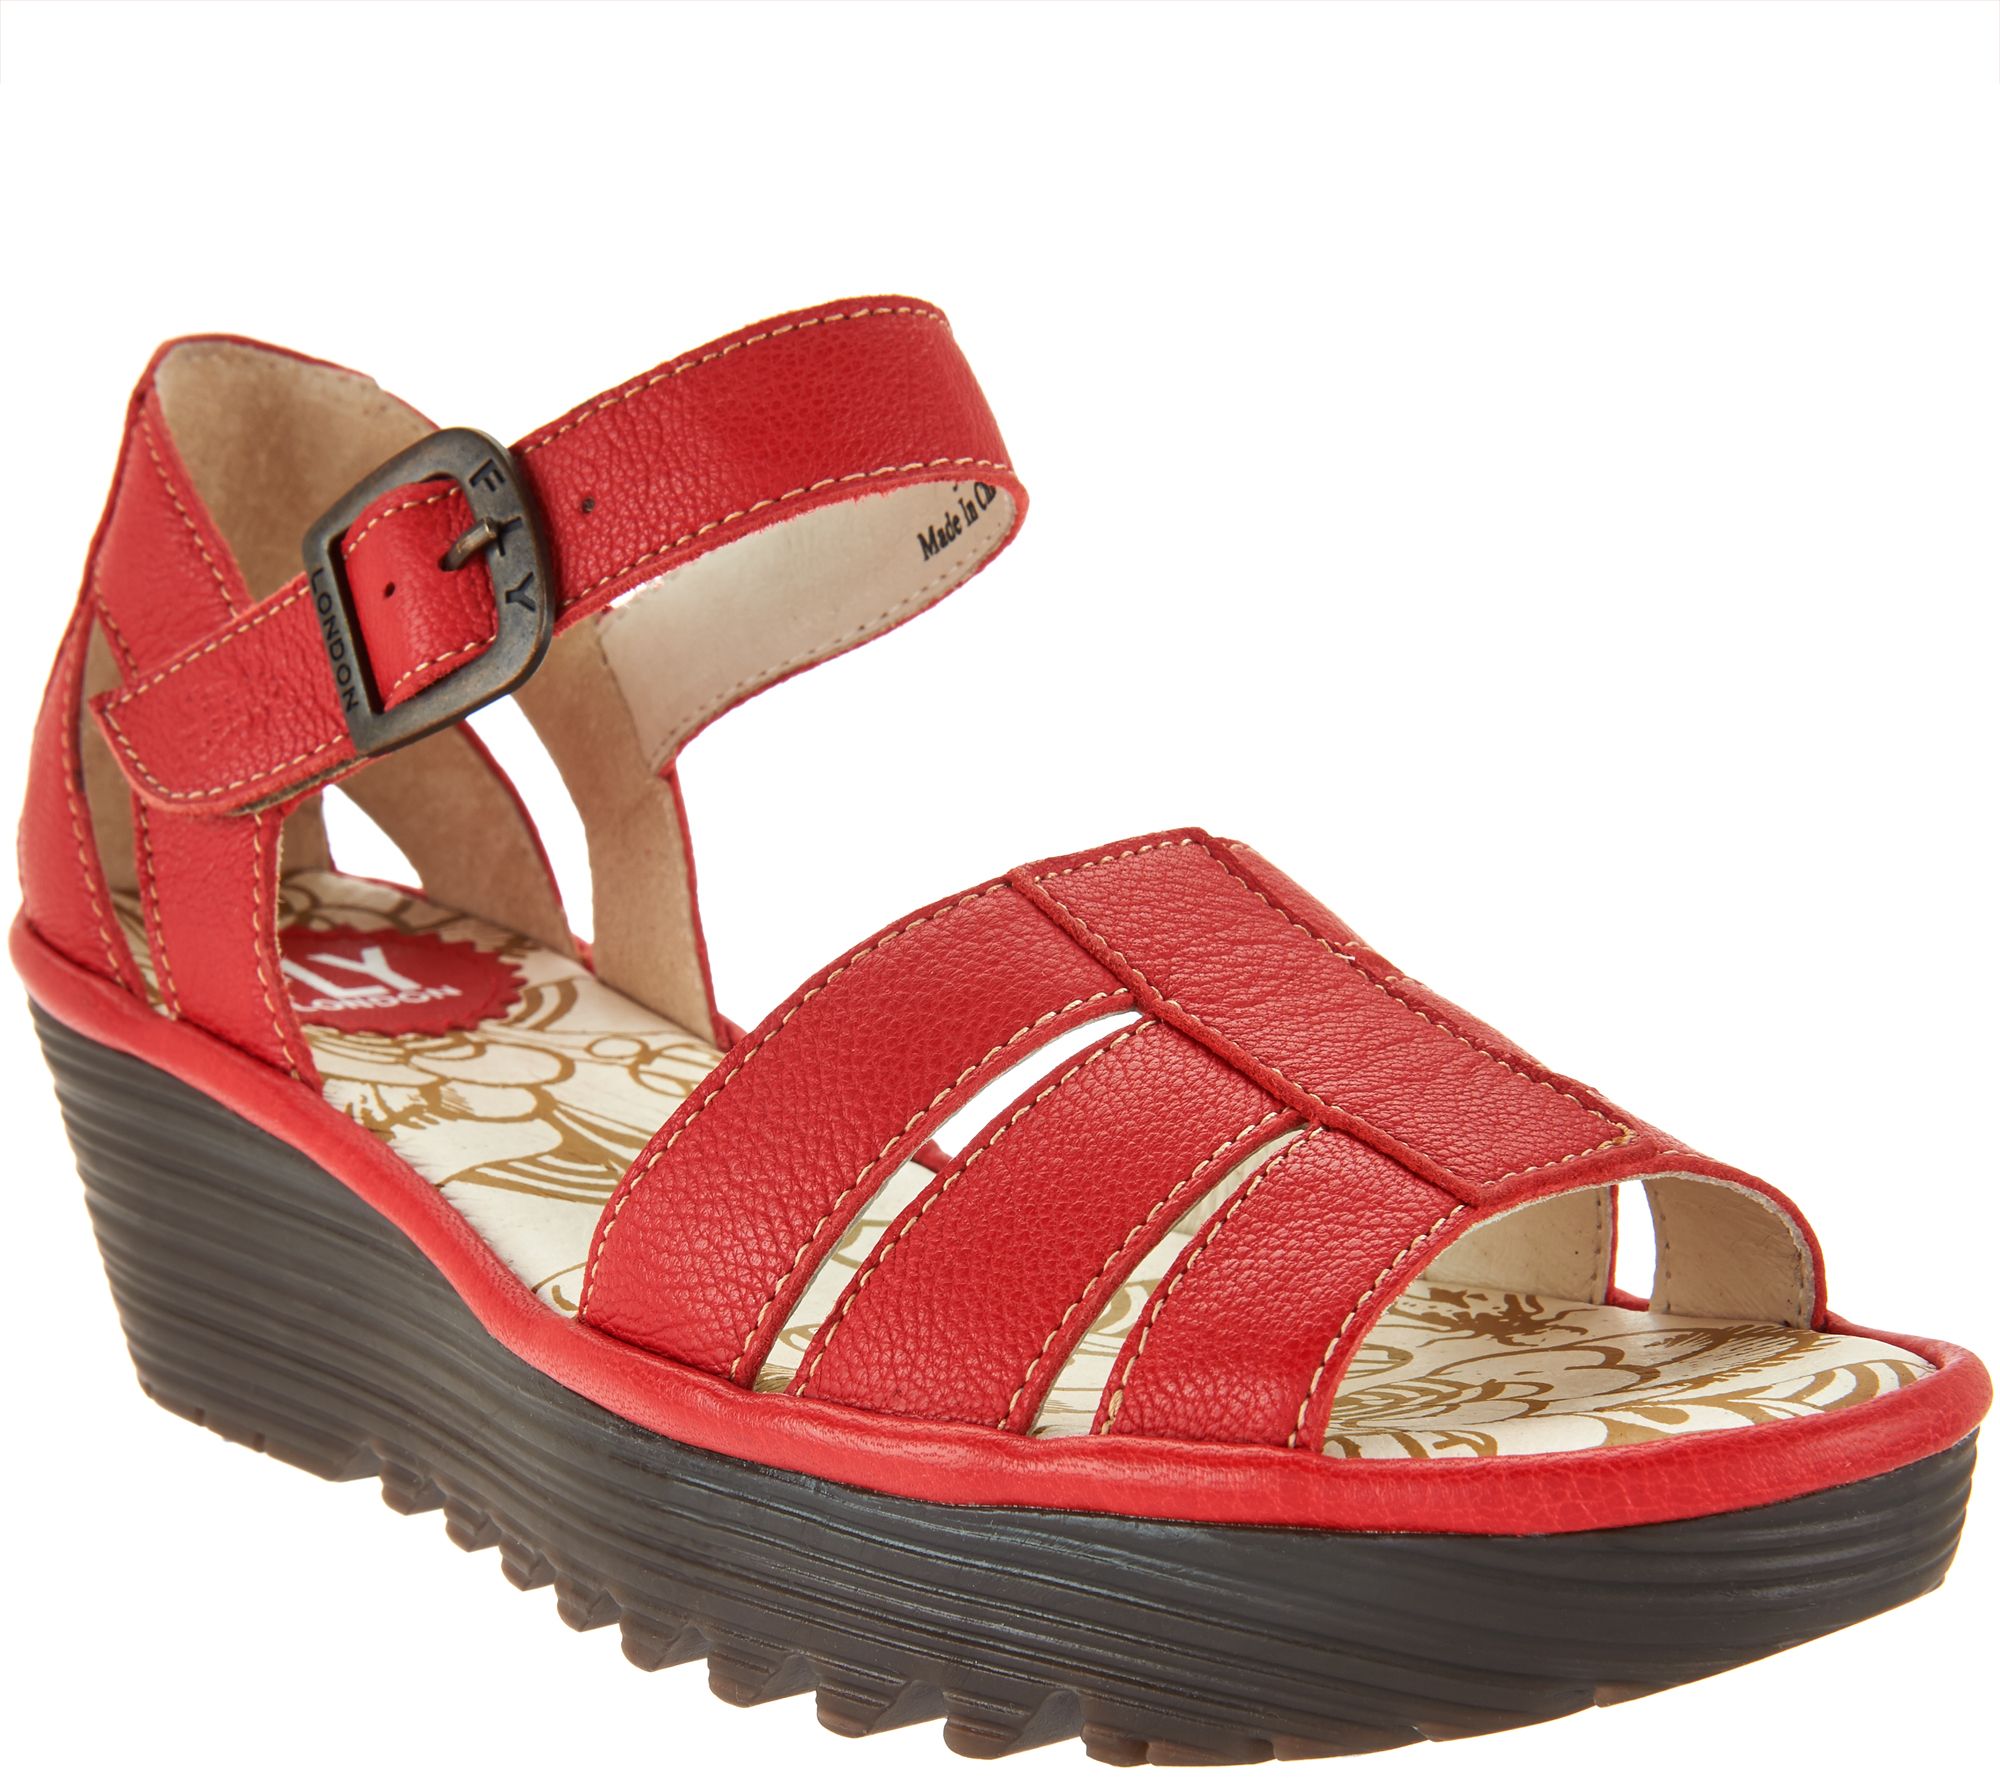 FLY London Leather Triple Strap Wedge Sandals - Rese - Page 1 — QVC.com